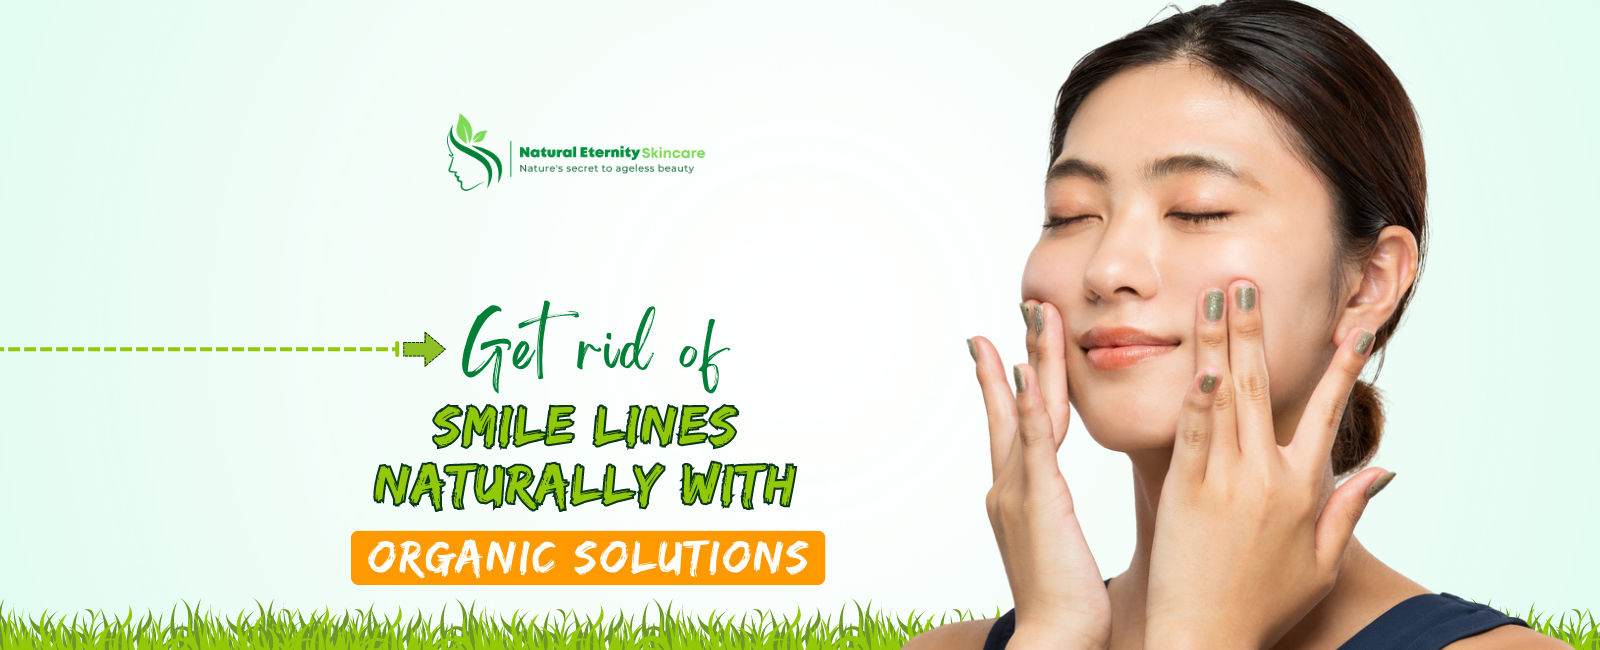 Natural Ways To Treat Smile Lines Without Surgery